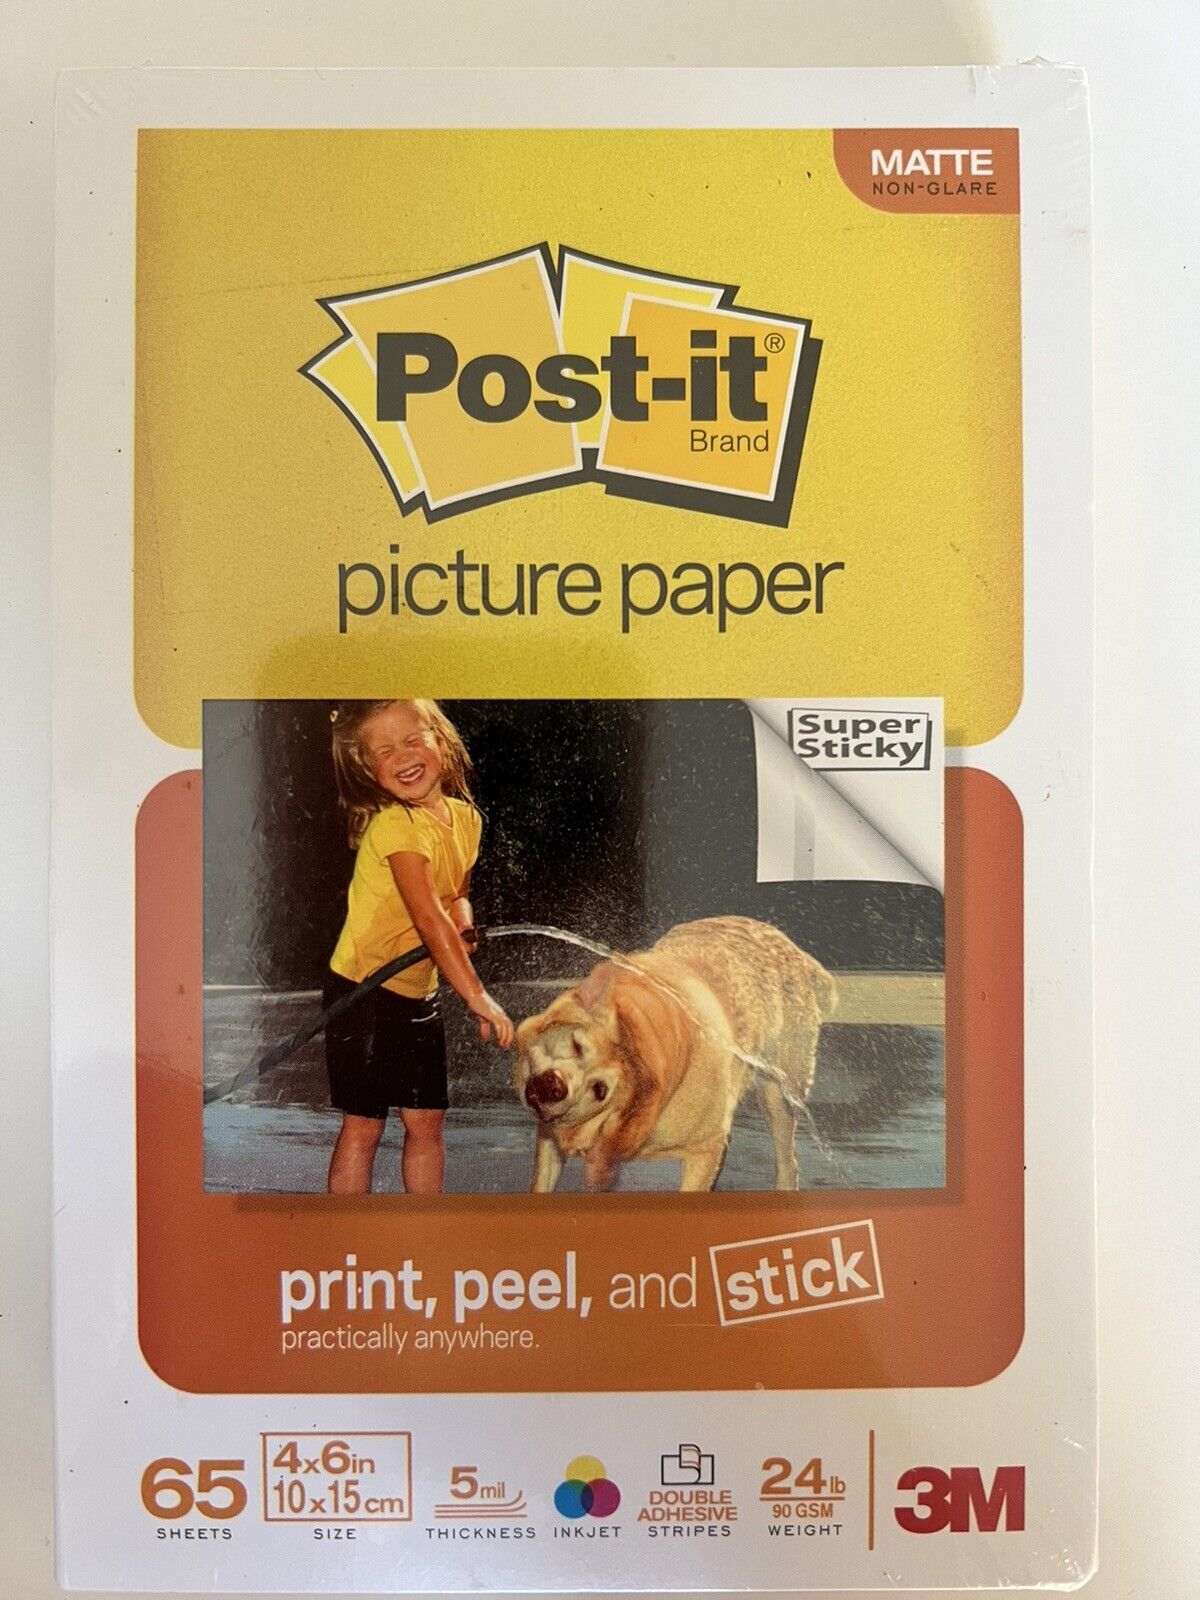 3M Post-It Super Sticky Picture Paper - 4" x 6" Matte 65 Sheets BRAND NEW